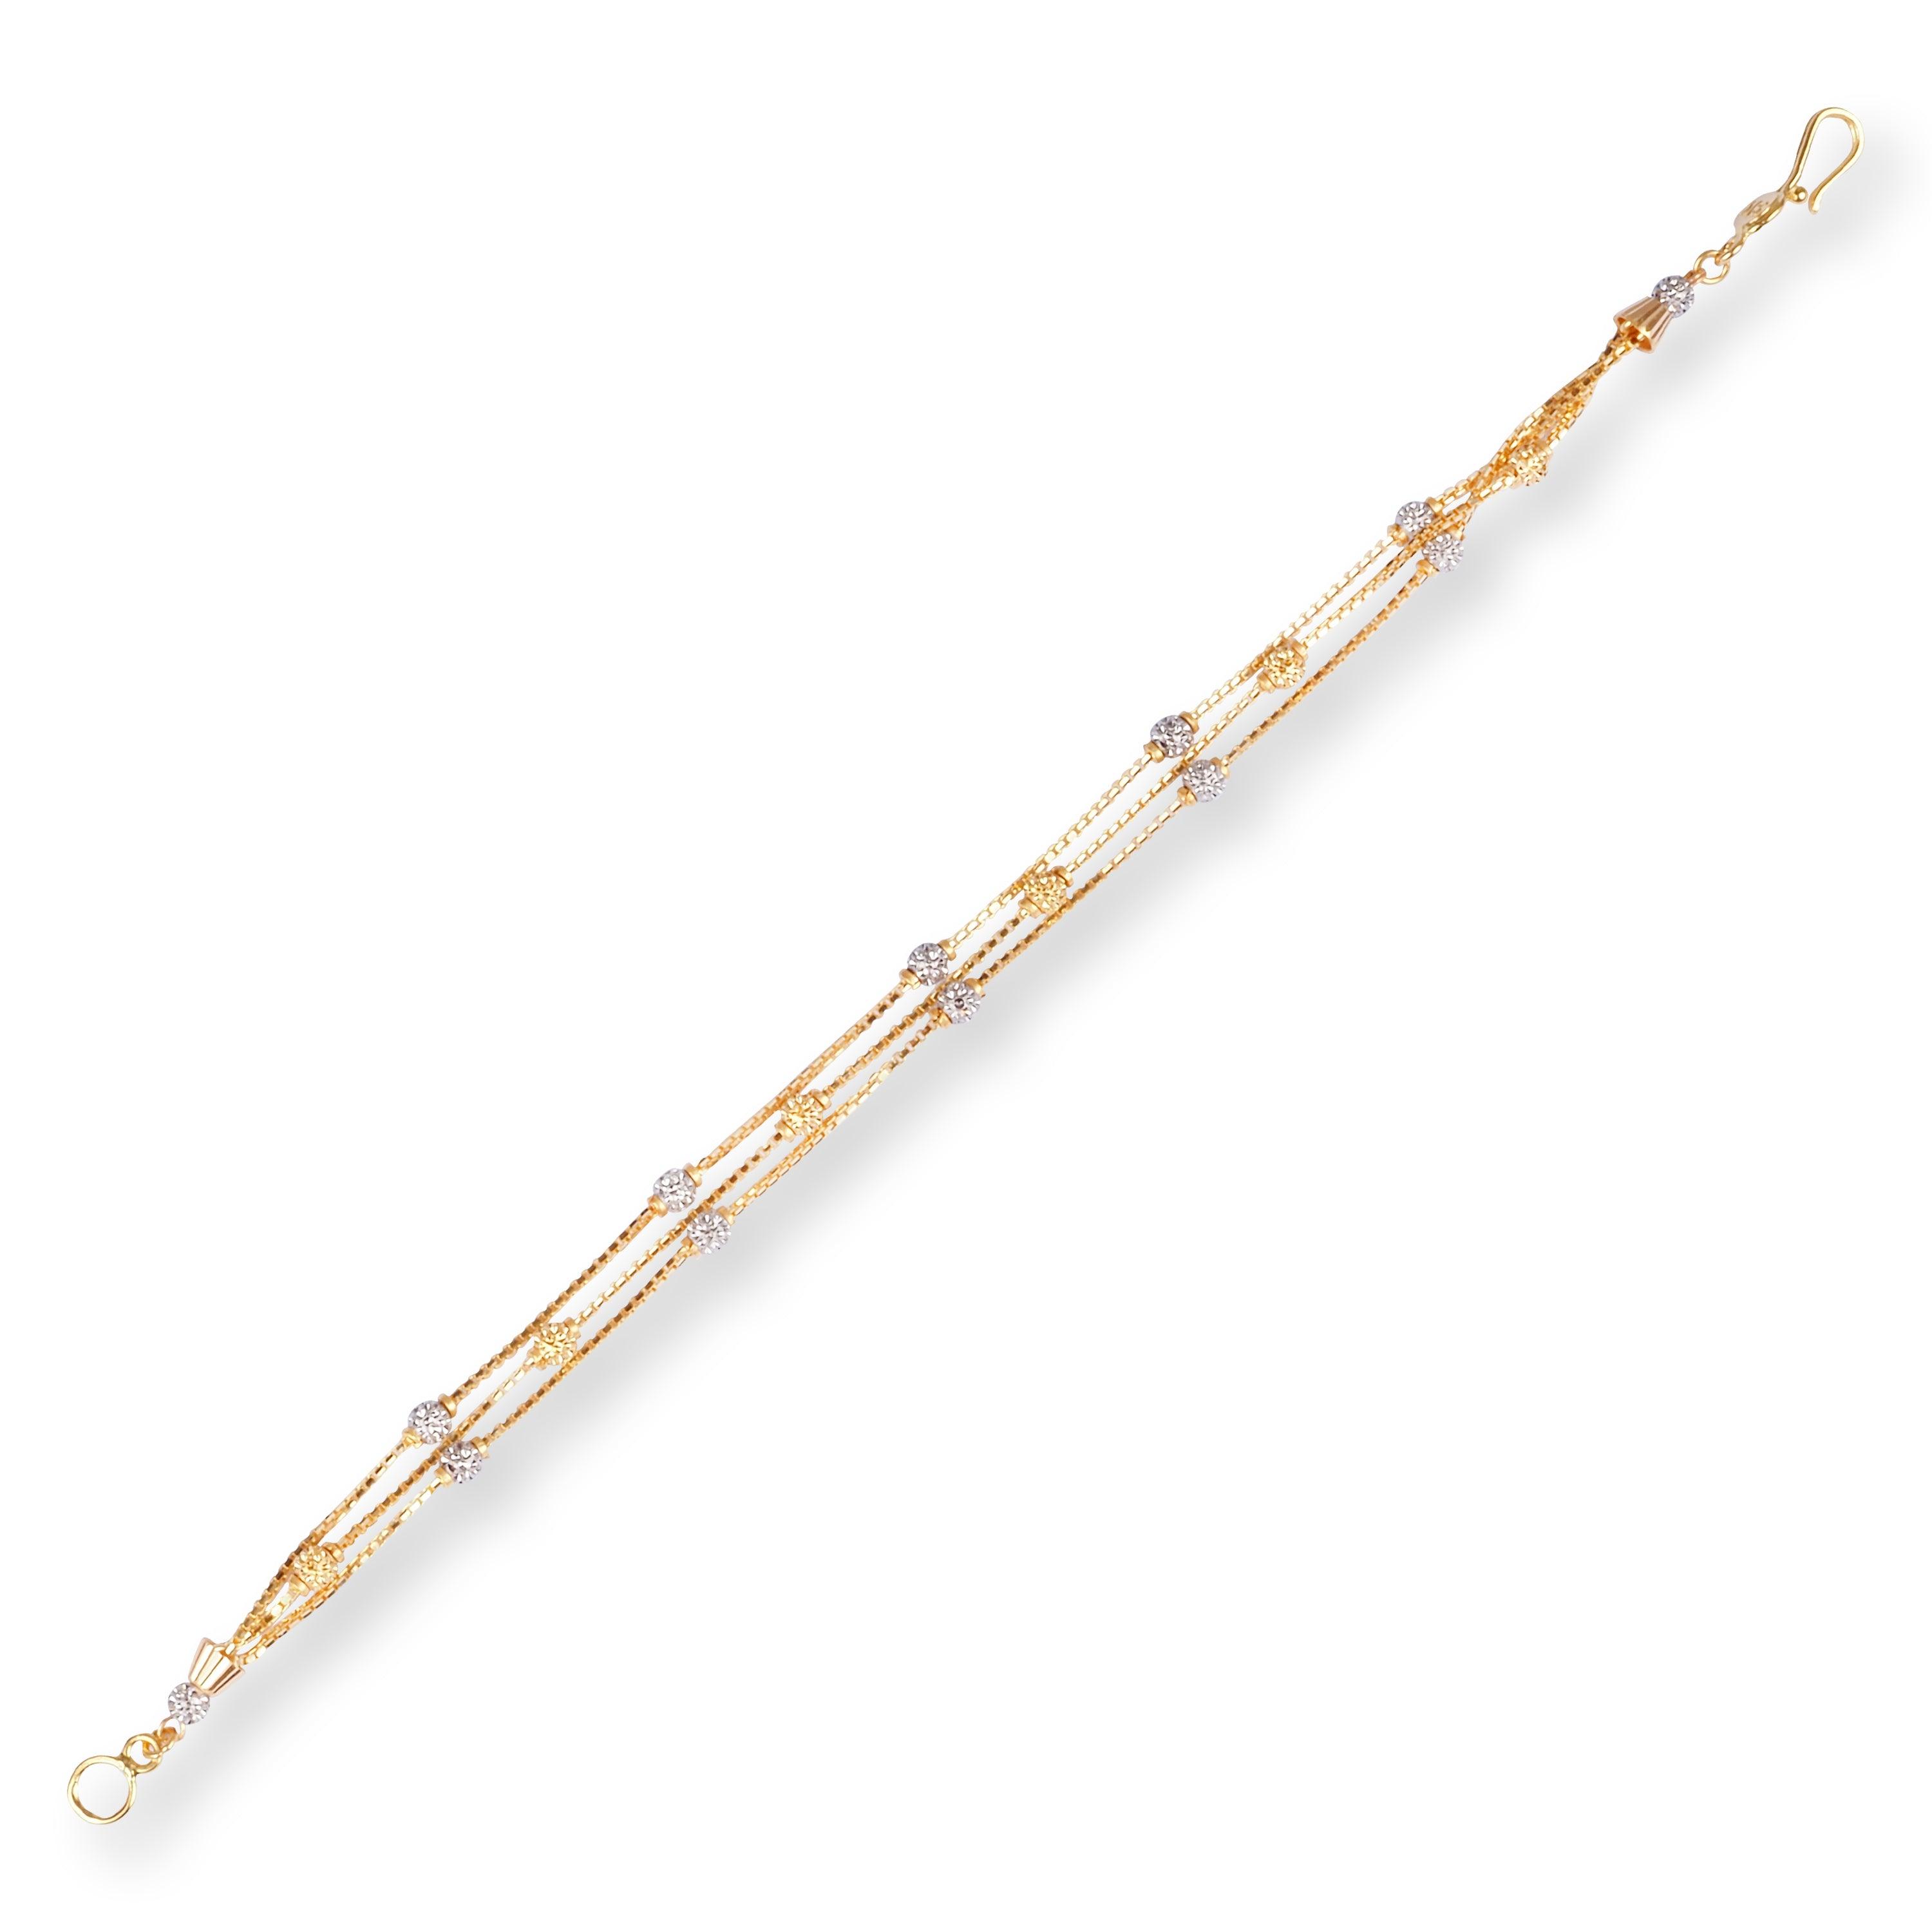 22ct Gold Three Row Bracelet with Plain and Rhodium Diamond Cut Beads and Hook Clasp LBR-8501 - Minar Jewellers